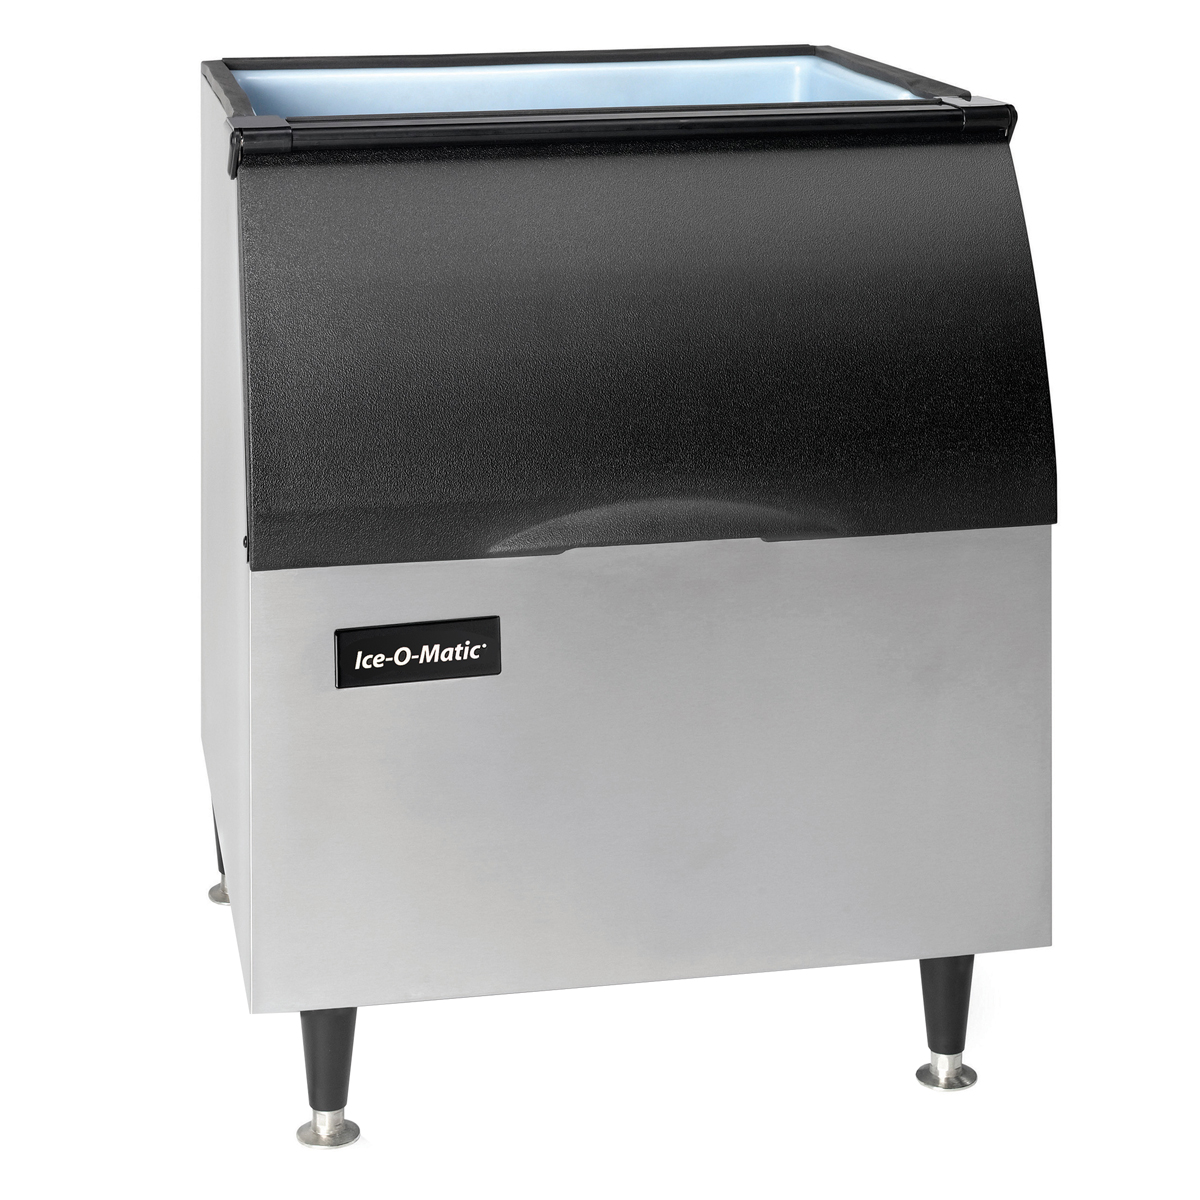 Ice-O-Matic CIM0430HW-B40PS Cube-Style Ice Maker Plus Ice Bin for Ice Machines image 1